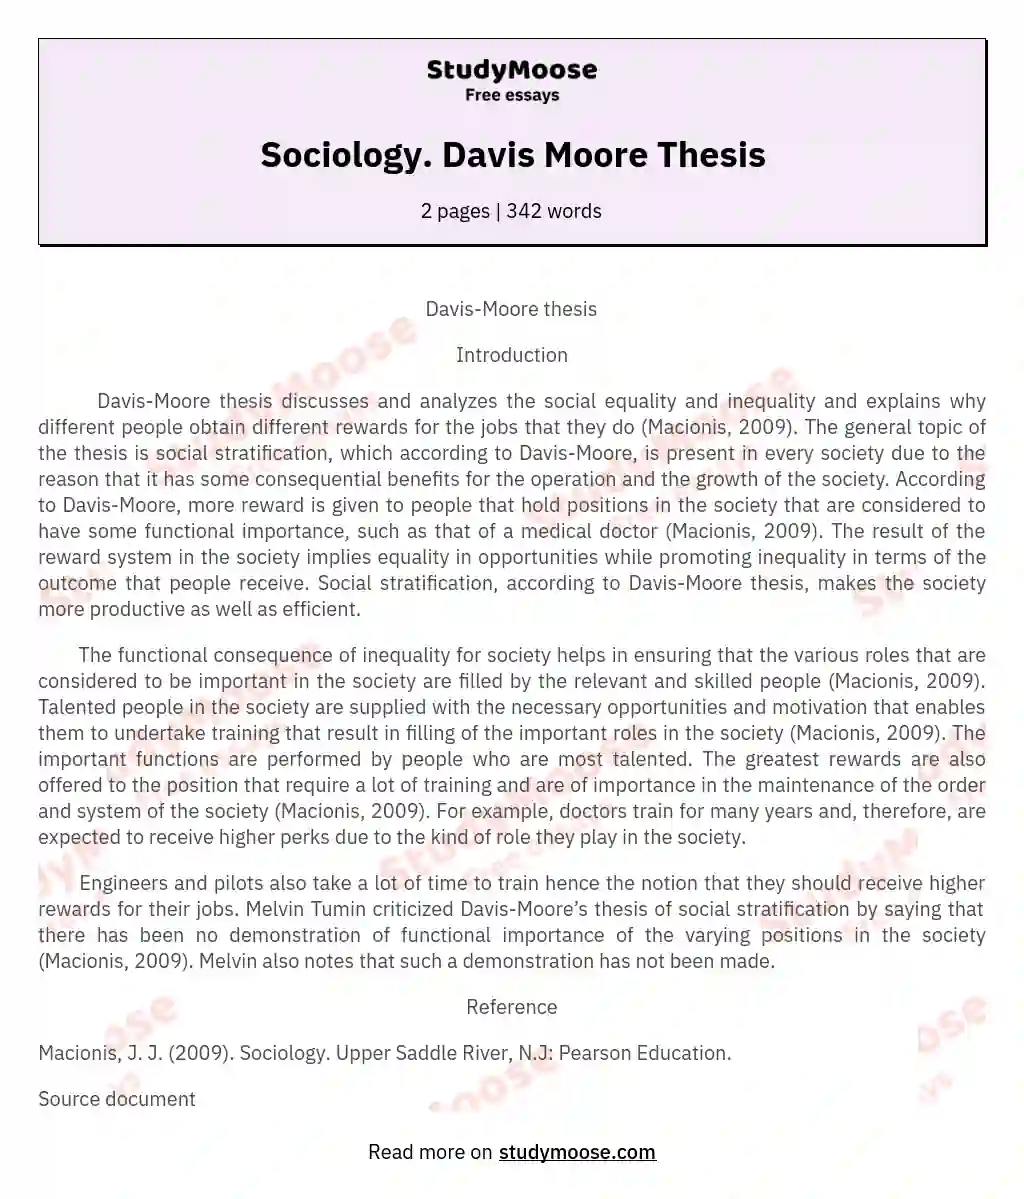 thesis title on sociology